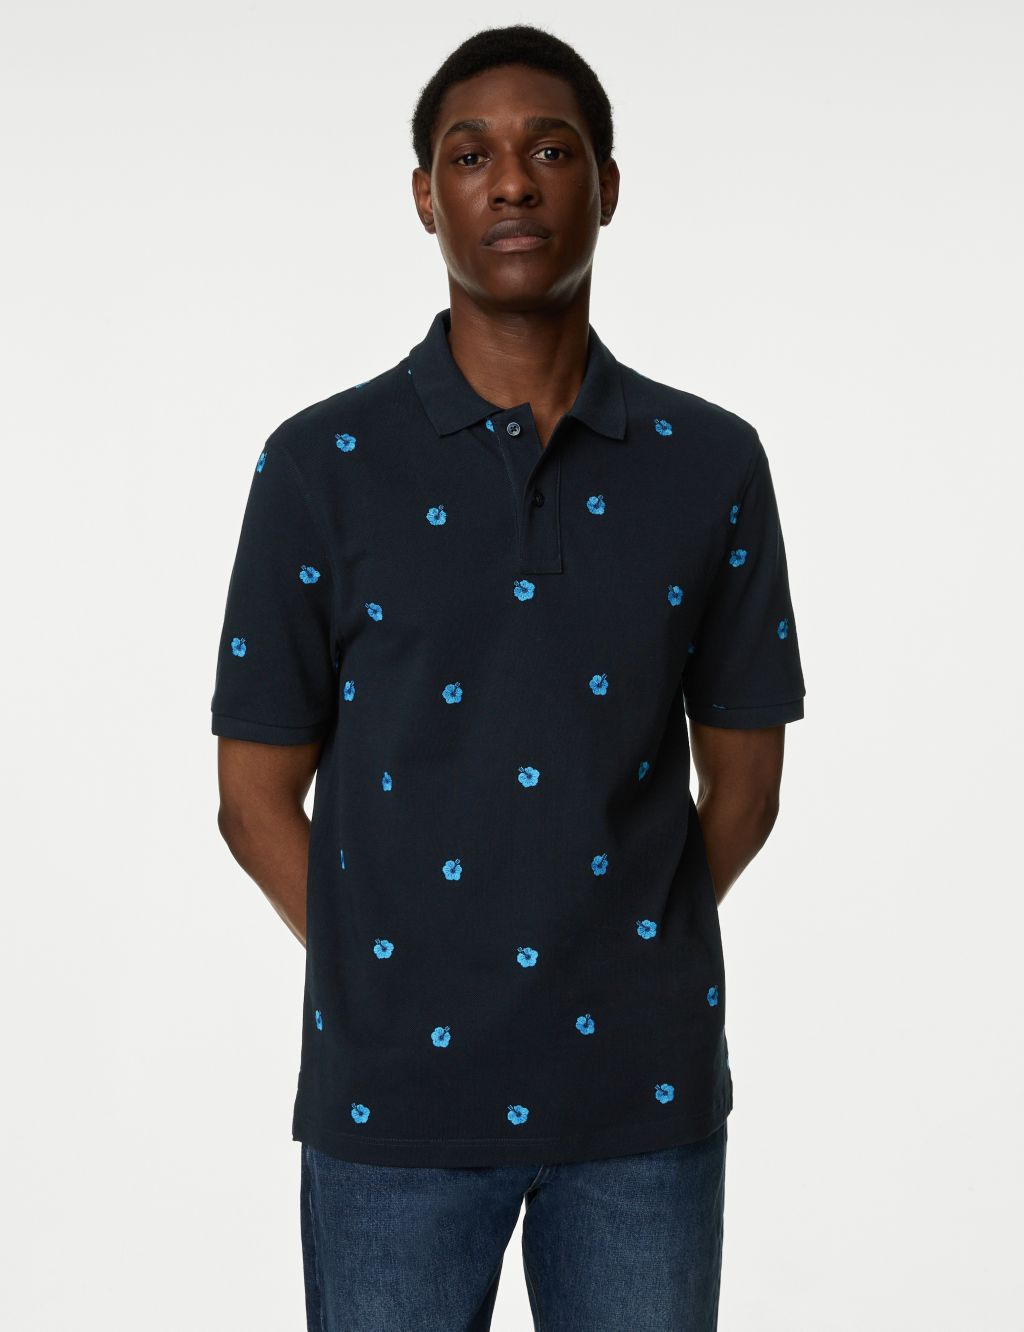 Pure Cotton Embroidered Polo Shirt